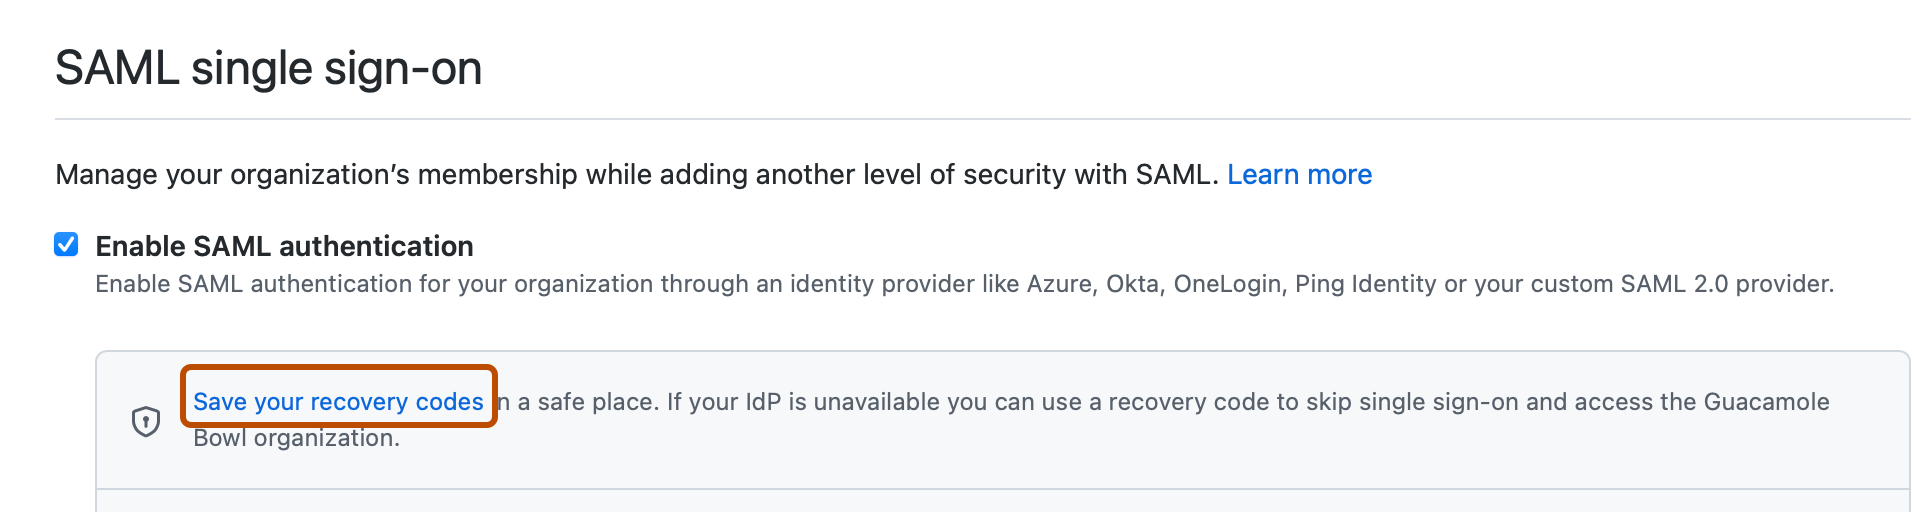 Screenshot of the "SAML single sign-on" section. A link, labeled "Save your recovery codes," is highlighted with an orange outline.